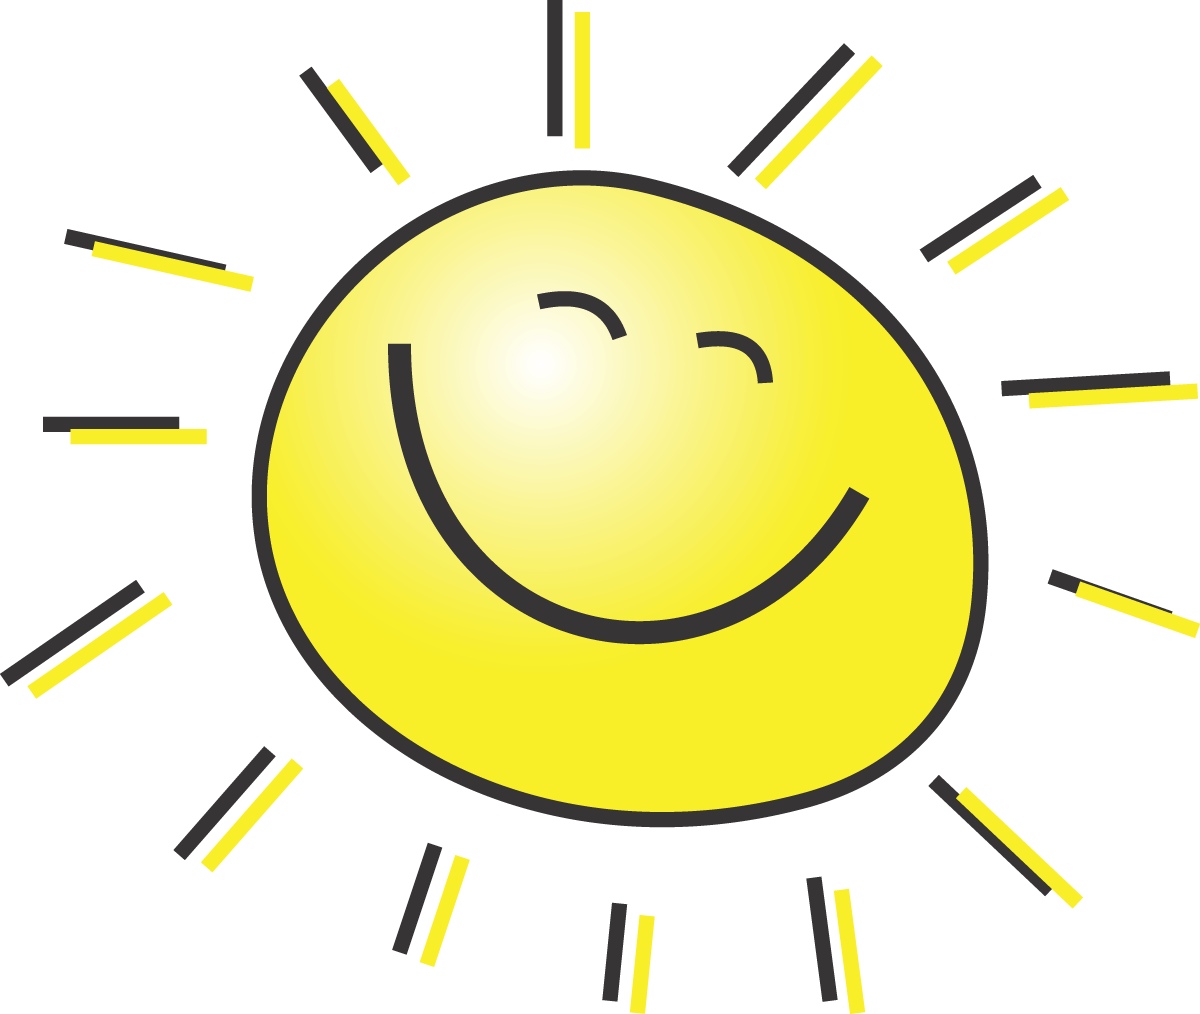 Sun clipart for kids png